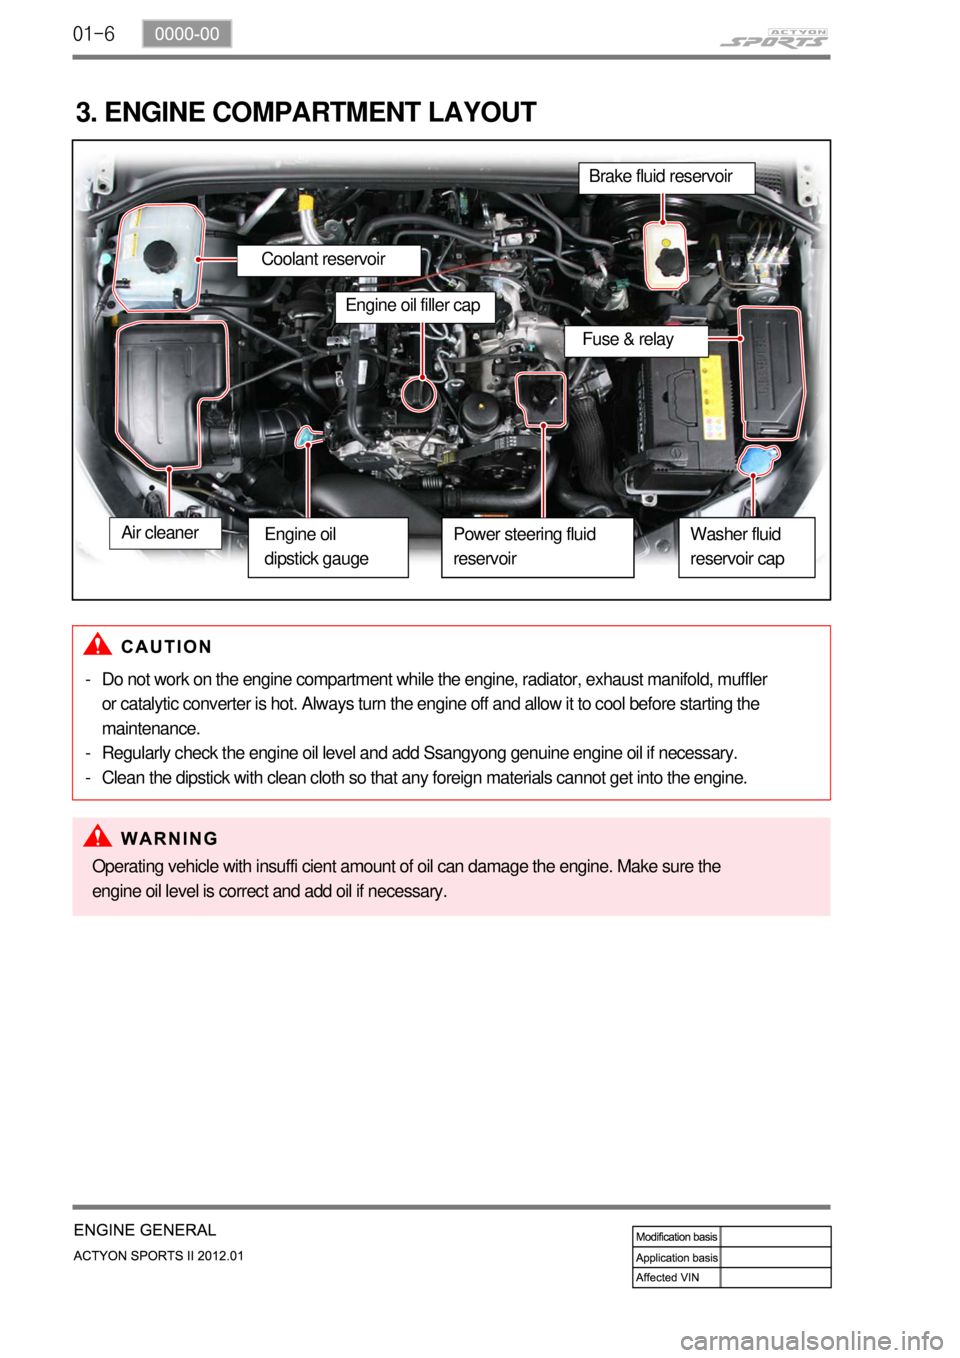 SSANGYONG NEW ACTYON SPORTS 2012  Service Manual 01-6
3. ENGINE COMPARTMENT LAYOUT
Do not work on the engine compartment while the engine, radiator, exhaust manifold, muffler 
or catalytic converter is hot. Always turn the engine off and allow it to